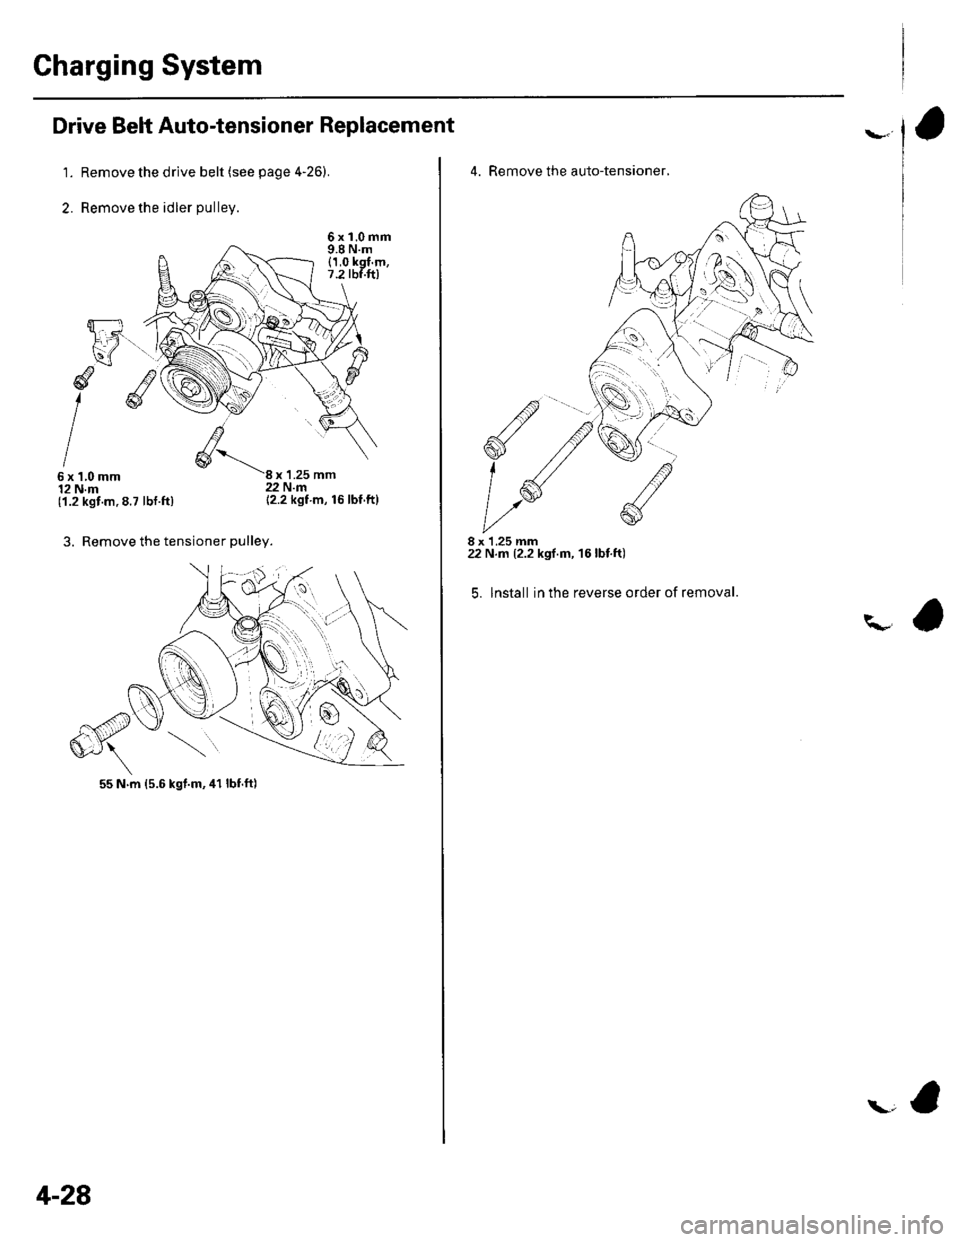 HONDA CIVIC 2003 7.G Workshop Manual Charging System
Drive Belt Auto-tensioner Replacement
1. Remove the drive belt (see page 426).
2. Remove the idler pulley.
6xl.0mm9.8 N.m(1,0 kgl.m,7.2 tbf.ft)
d
I6x1,0mm12 N.m(1.2 kgt.m.8.7 lbt.ft)